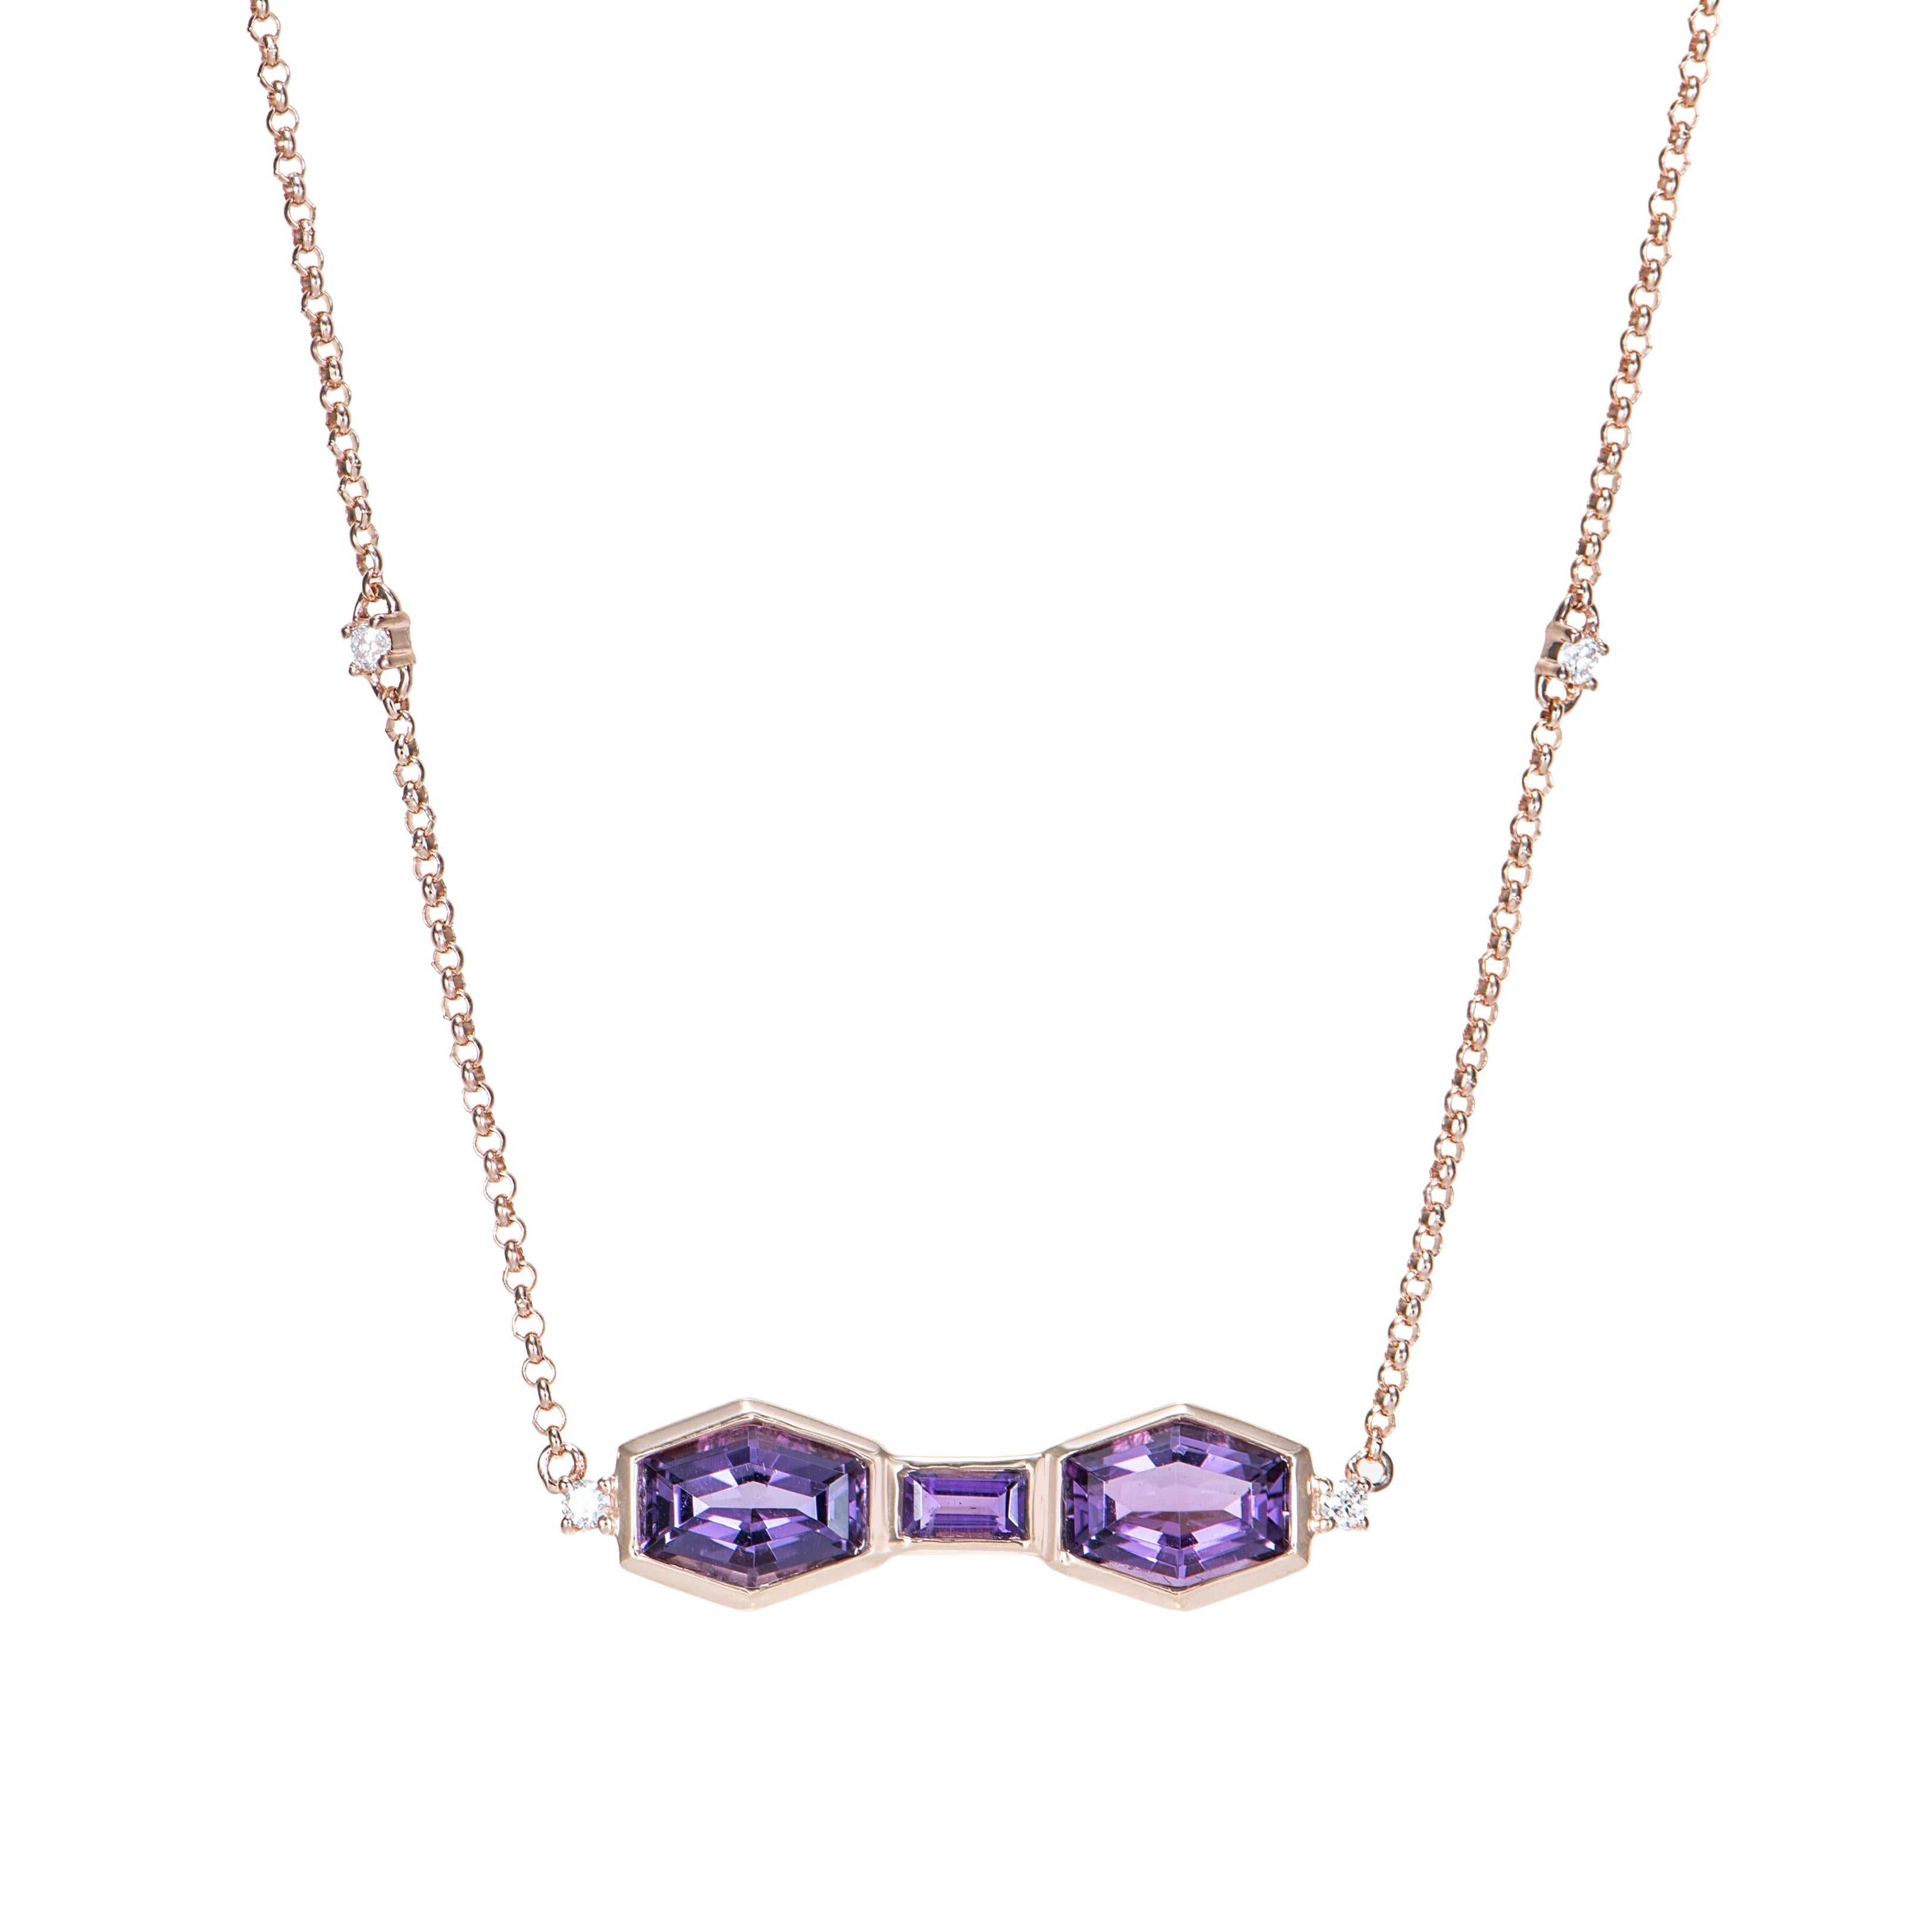 Contemporary 1.58 Carat Amethyst Pendant in 14 Karat Rose Gold with White Diamond. For Sale